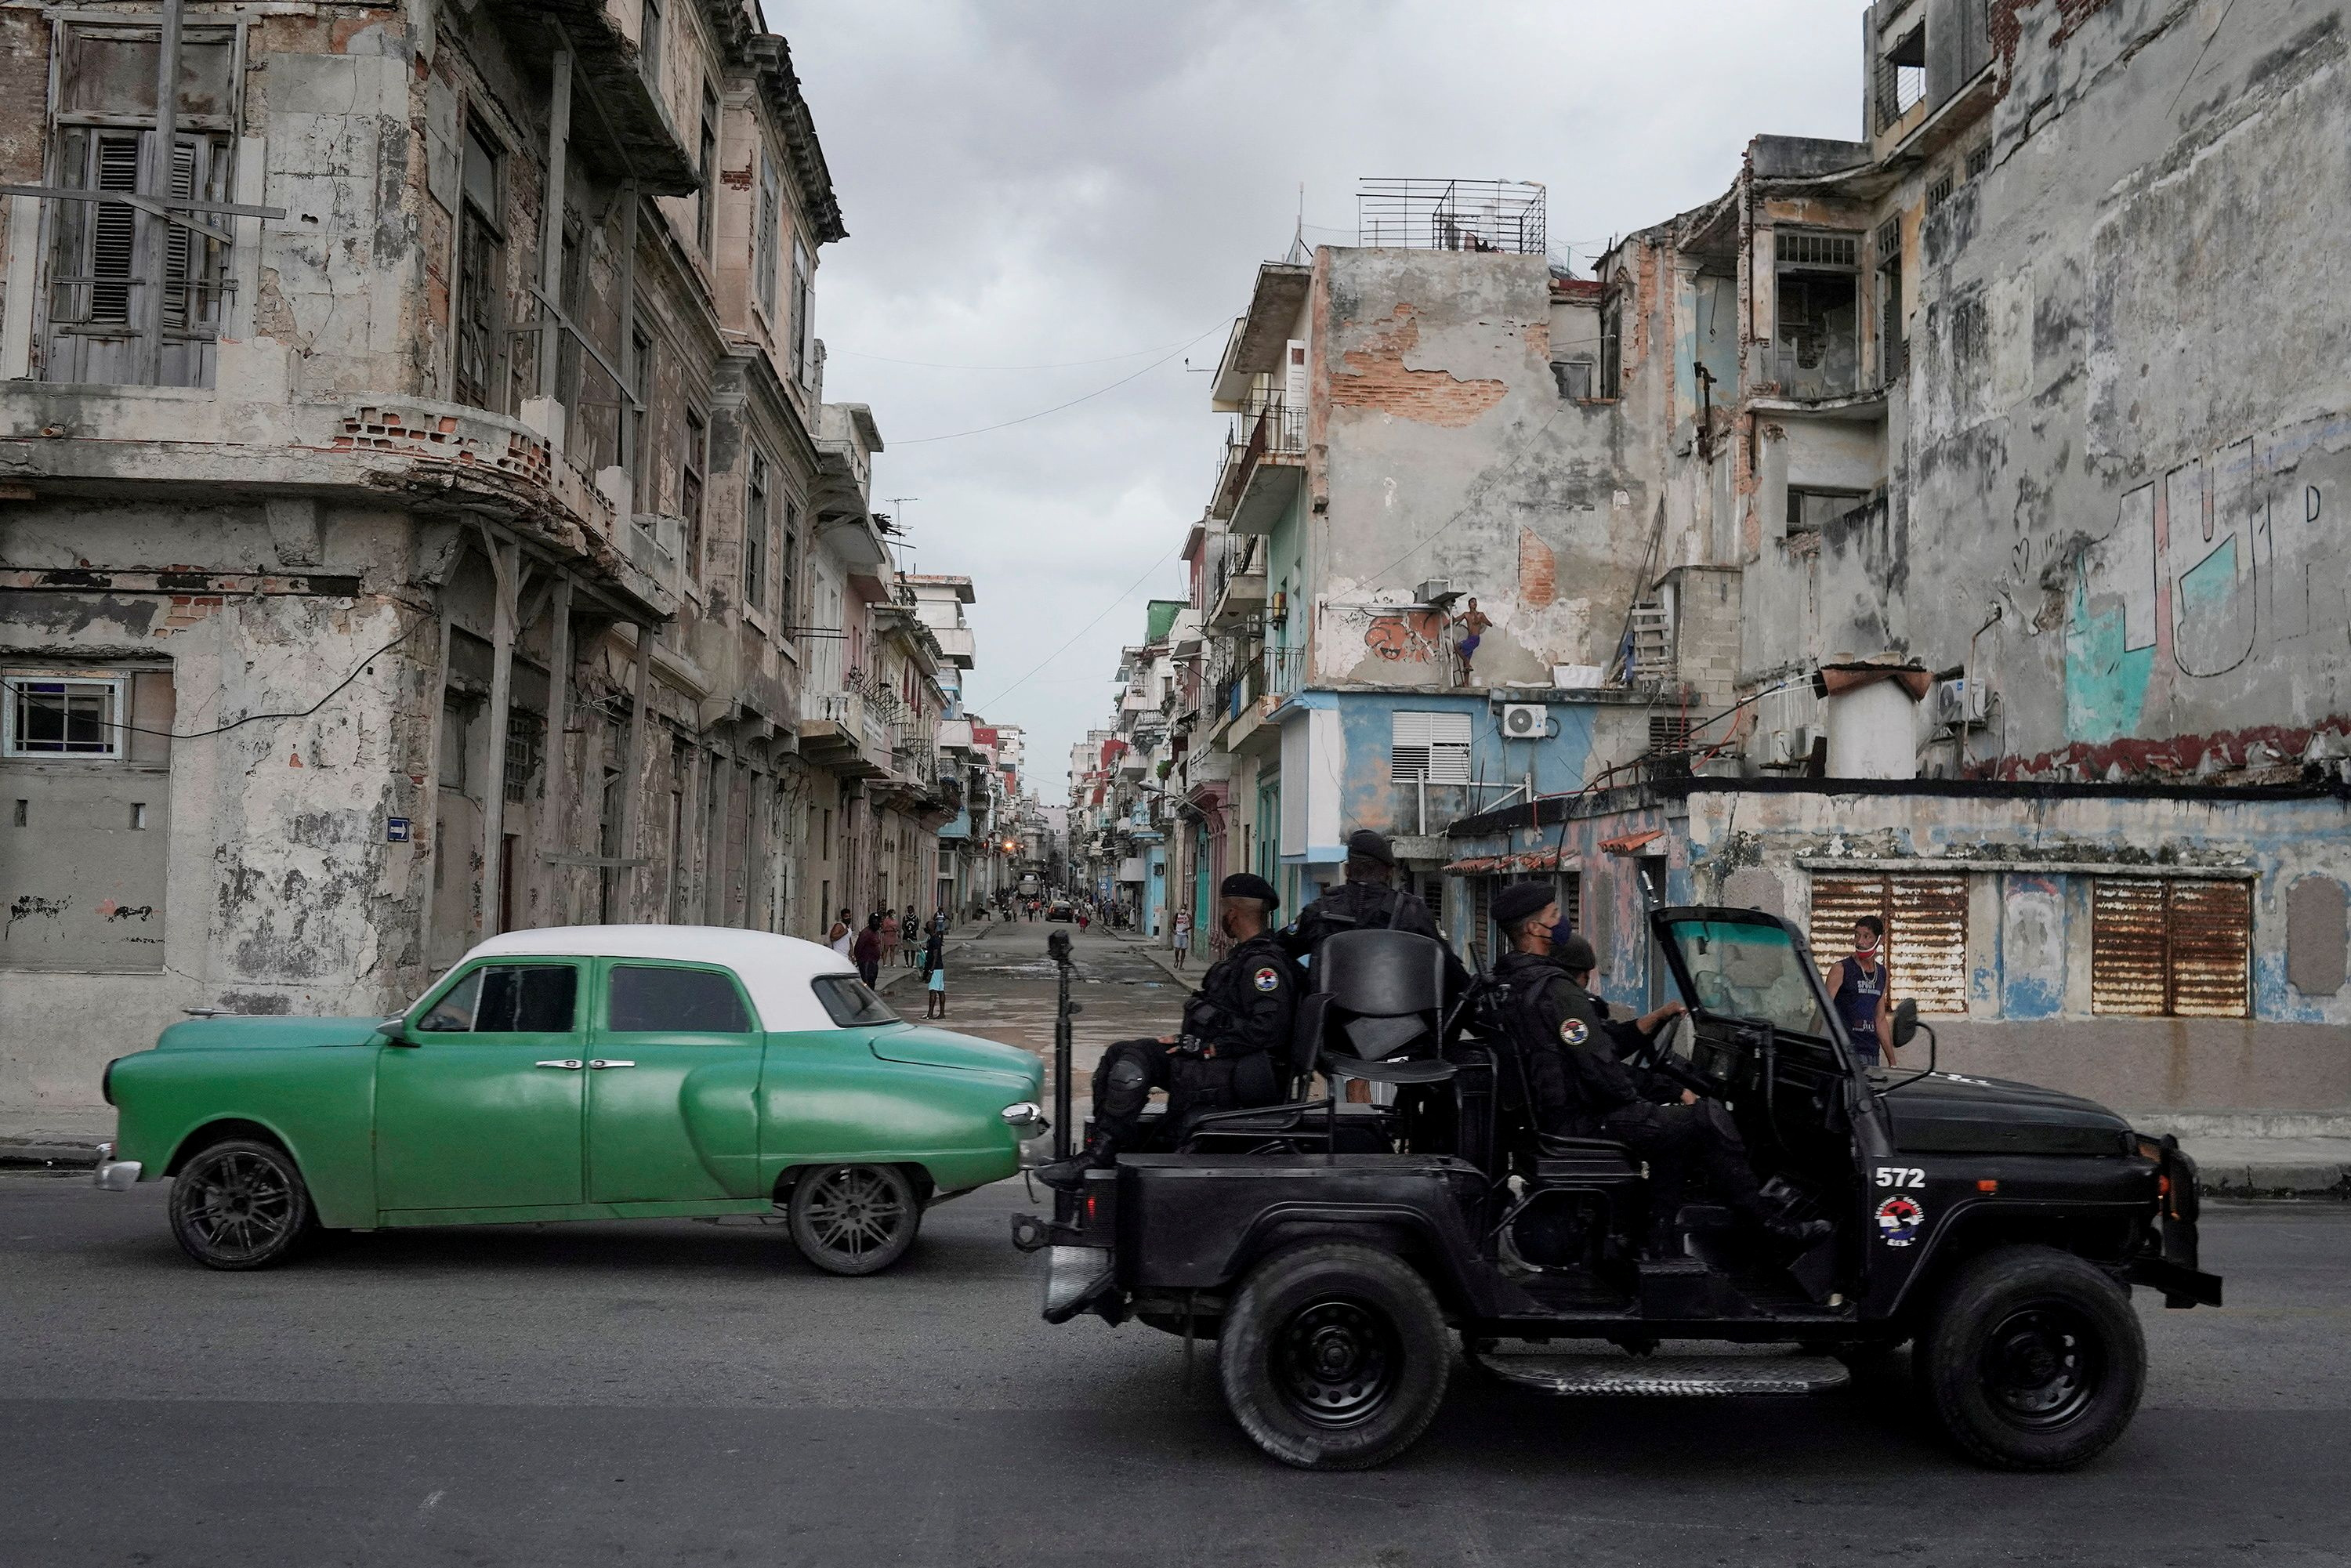 FILE PHOTO: A special forces vehicle passes by a vintage car in downtown Havana